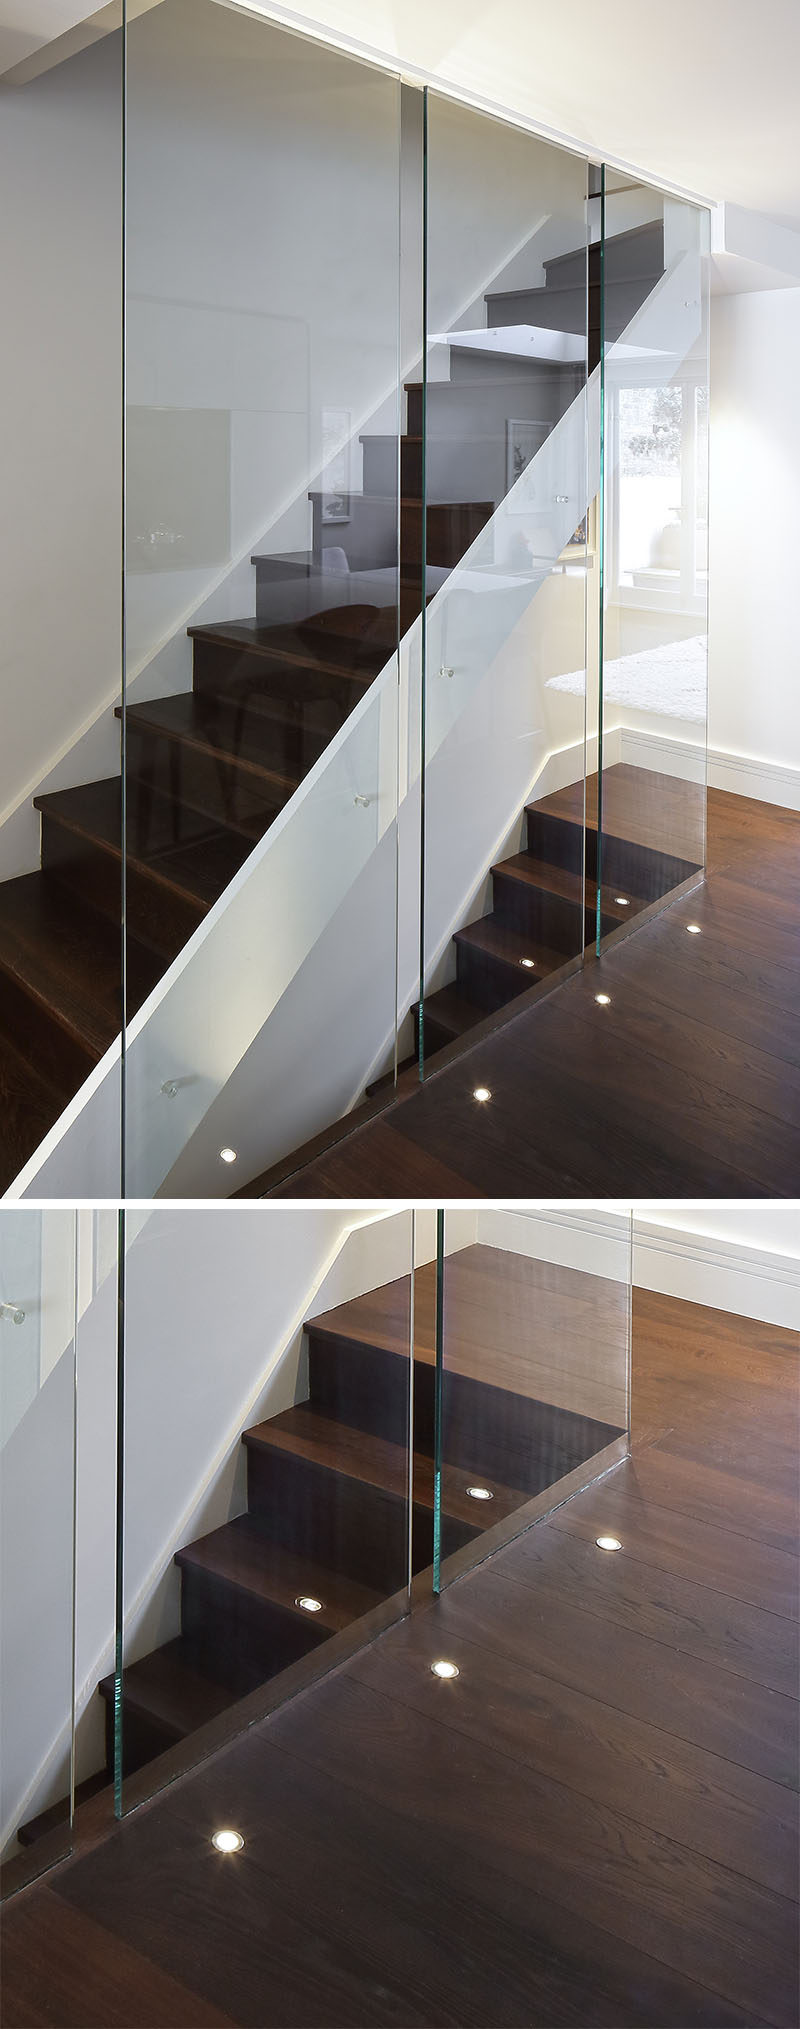 7 Interiors That Use Dramatic Uplighting To Brighten A Space // Small lights built in to the floor of this home brighten the dark wood floor and contribute to the modern feel of the staircase.